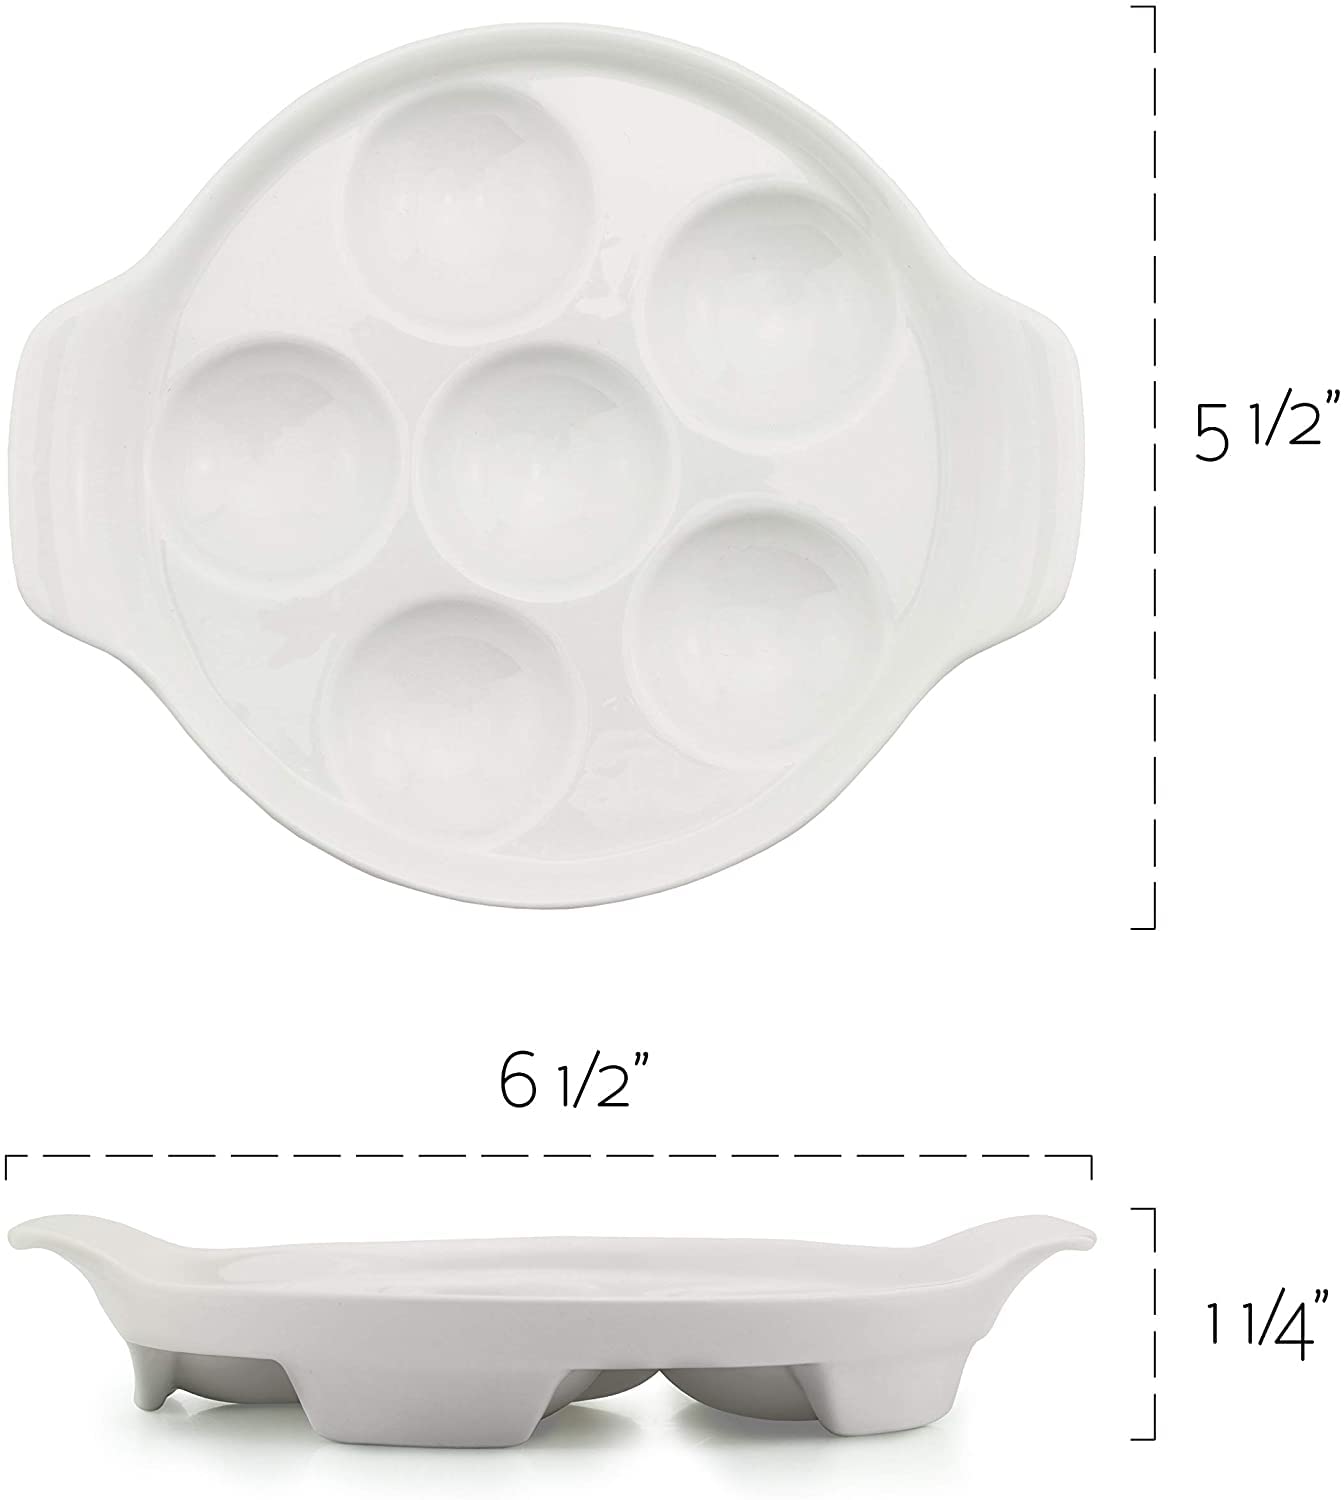 Cornucopia White Ceramic Escargot Plates (2-Pack), 6.5-Inch Footed Dishes, Oven Safe